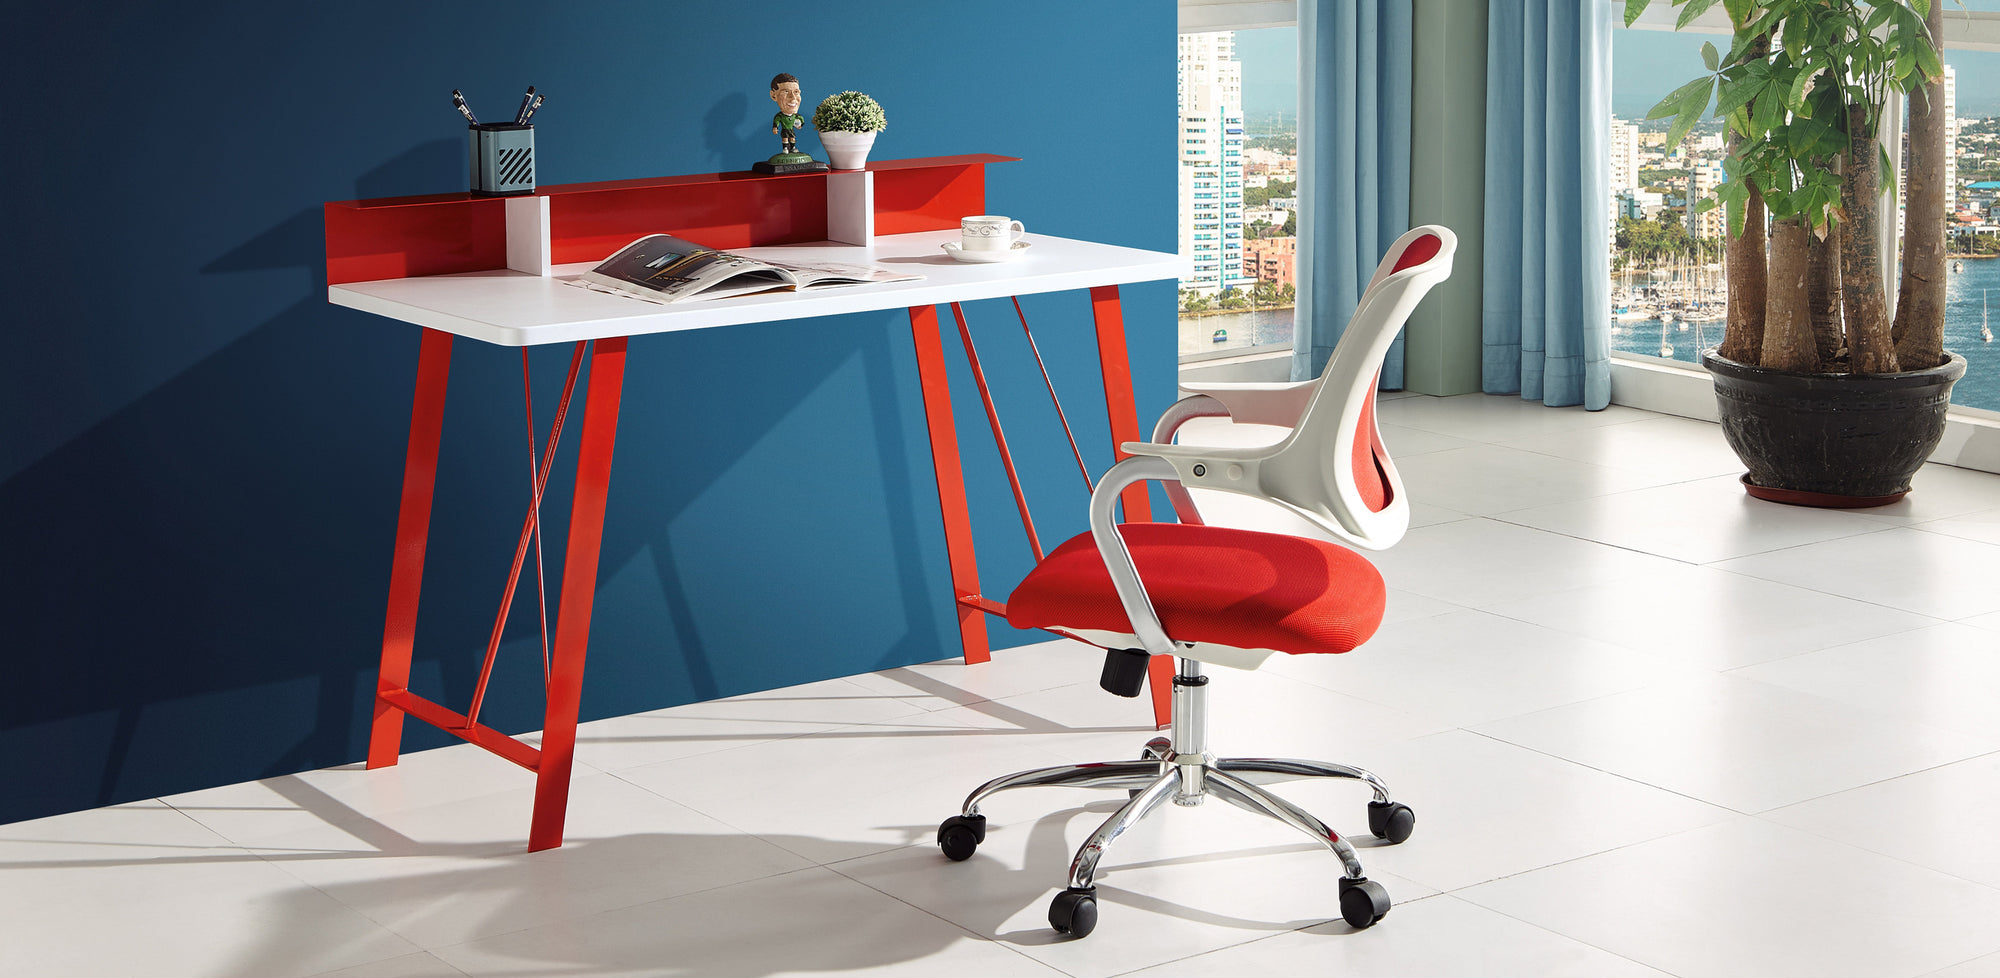 office furniture, home office, WFH work from home working from home work remote